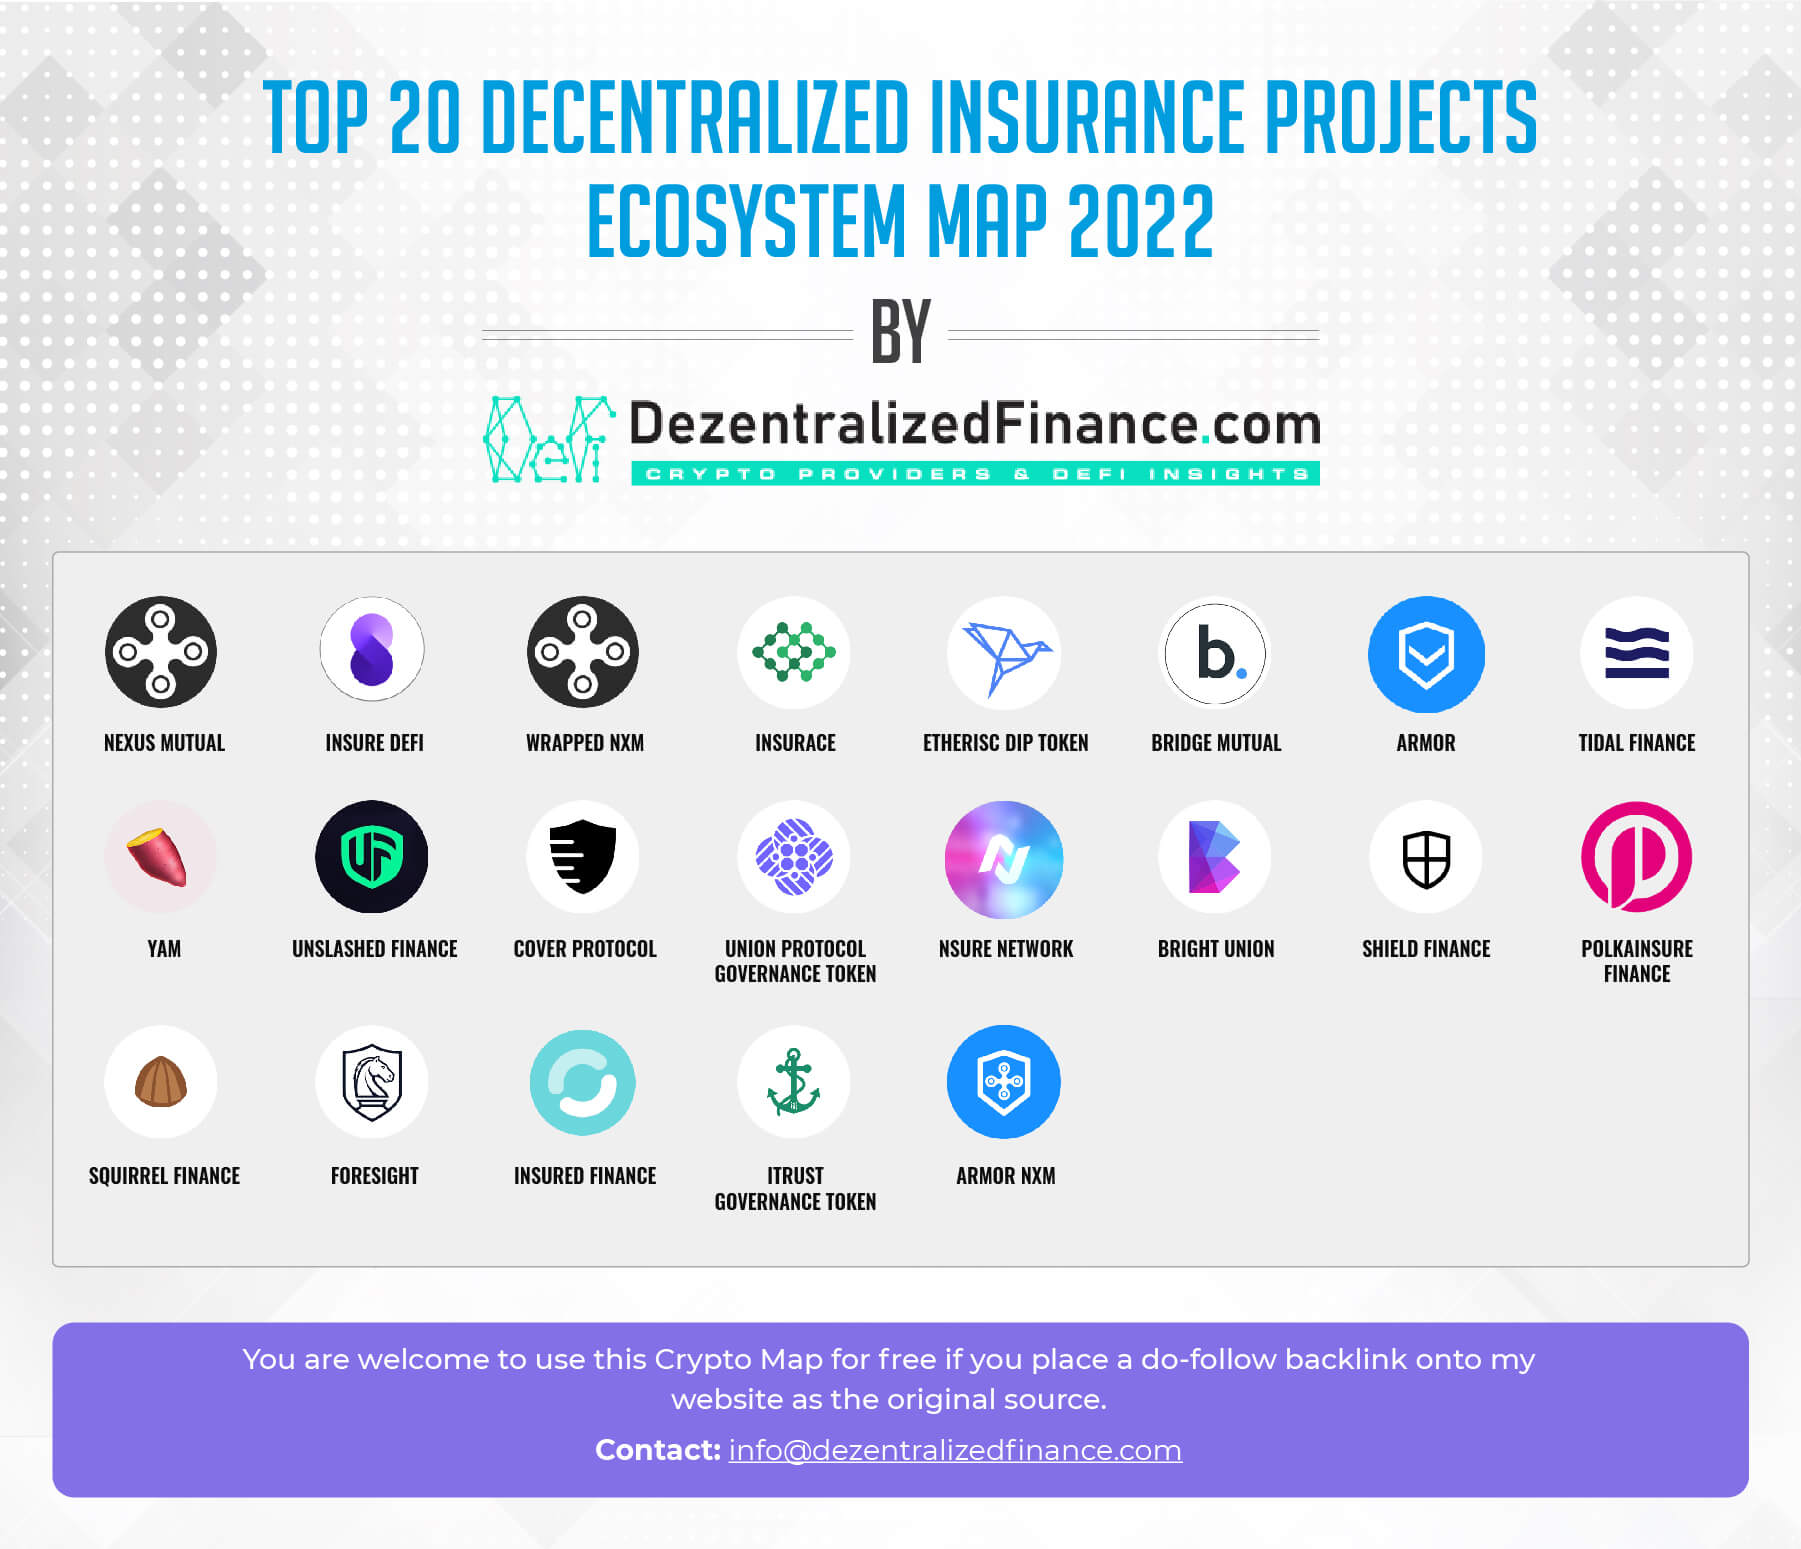 Top-20-Decentralized-Insurance-Projects-Ecosystem-v1-01